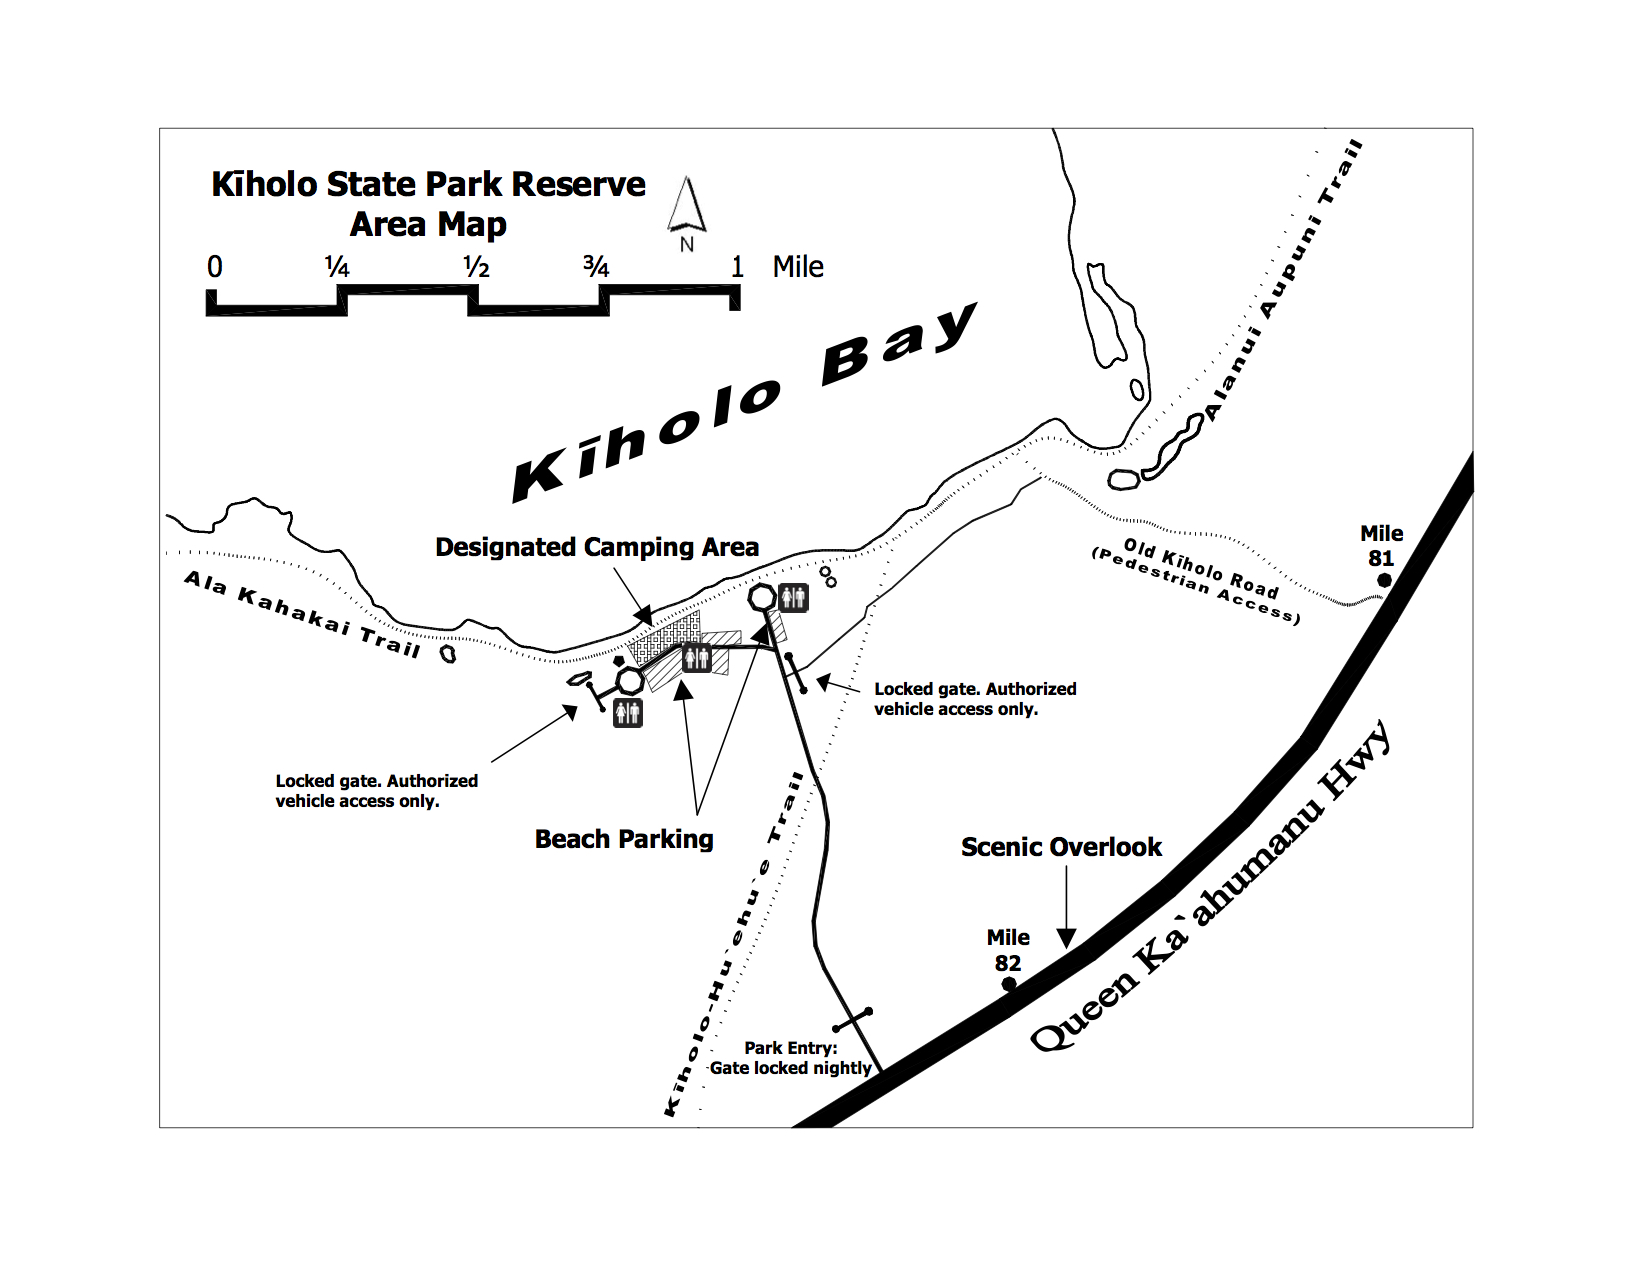 Kiholo State Park Map_Entire Area.jpg